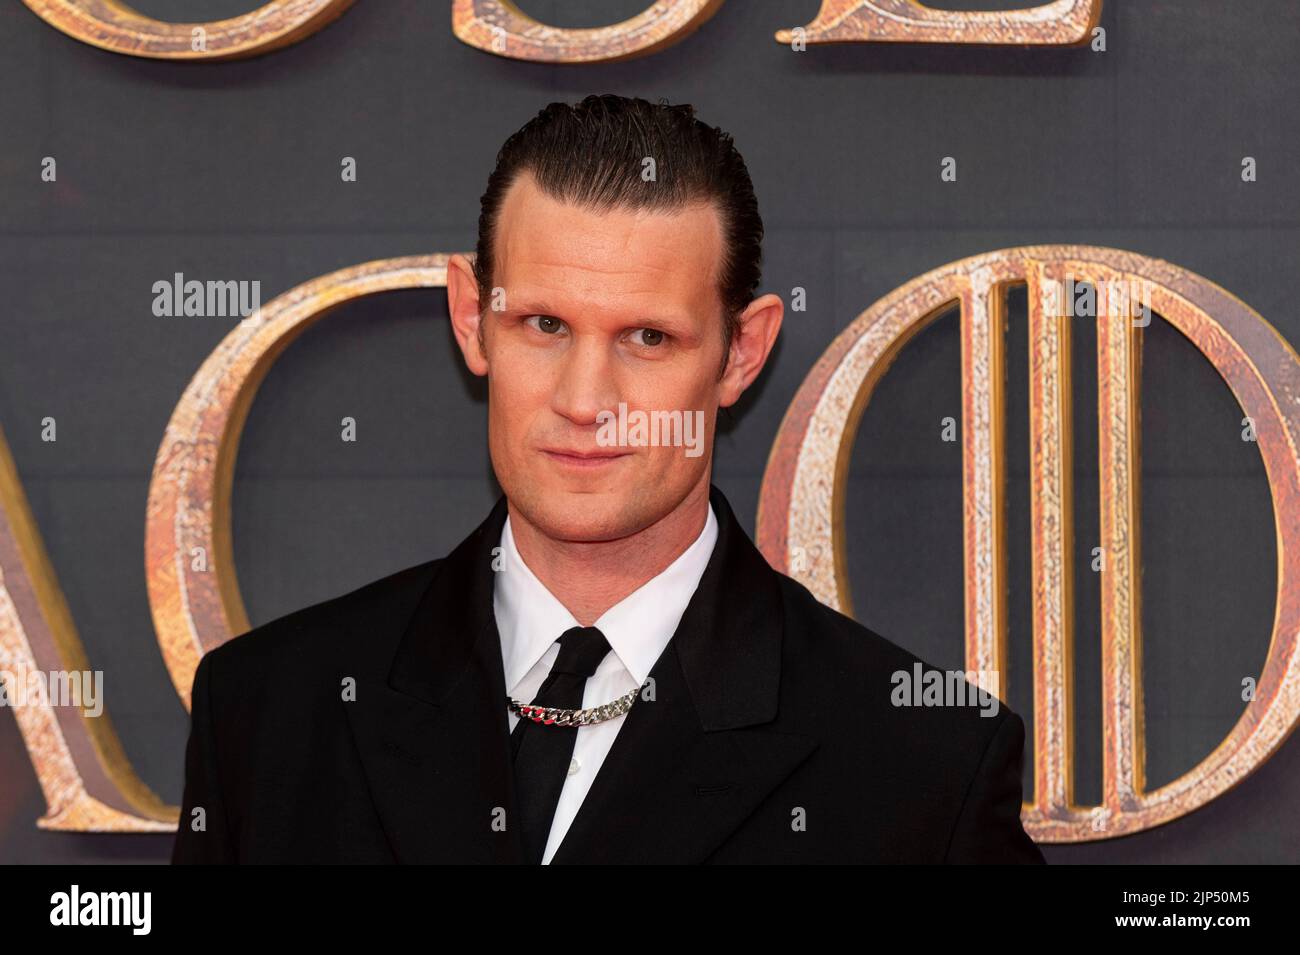 London, UK.  15 August 2022. Cast member Matt Smith attends the Sky Group Premiere in Leicester Square Gardens of ‘House of the Dragon’, the new series based on George R.R. Martin’s Fire & Blood novel, set 200 years before the events of ‘Game of Thrones’, and tells the story of the House of Targaryen. The series begins on Sky 22 August. Credit: Stephen Chung / EMPICS / Alamy Live News Stock Photo